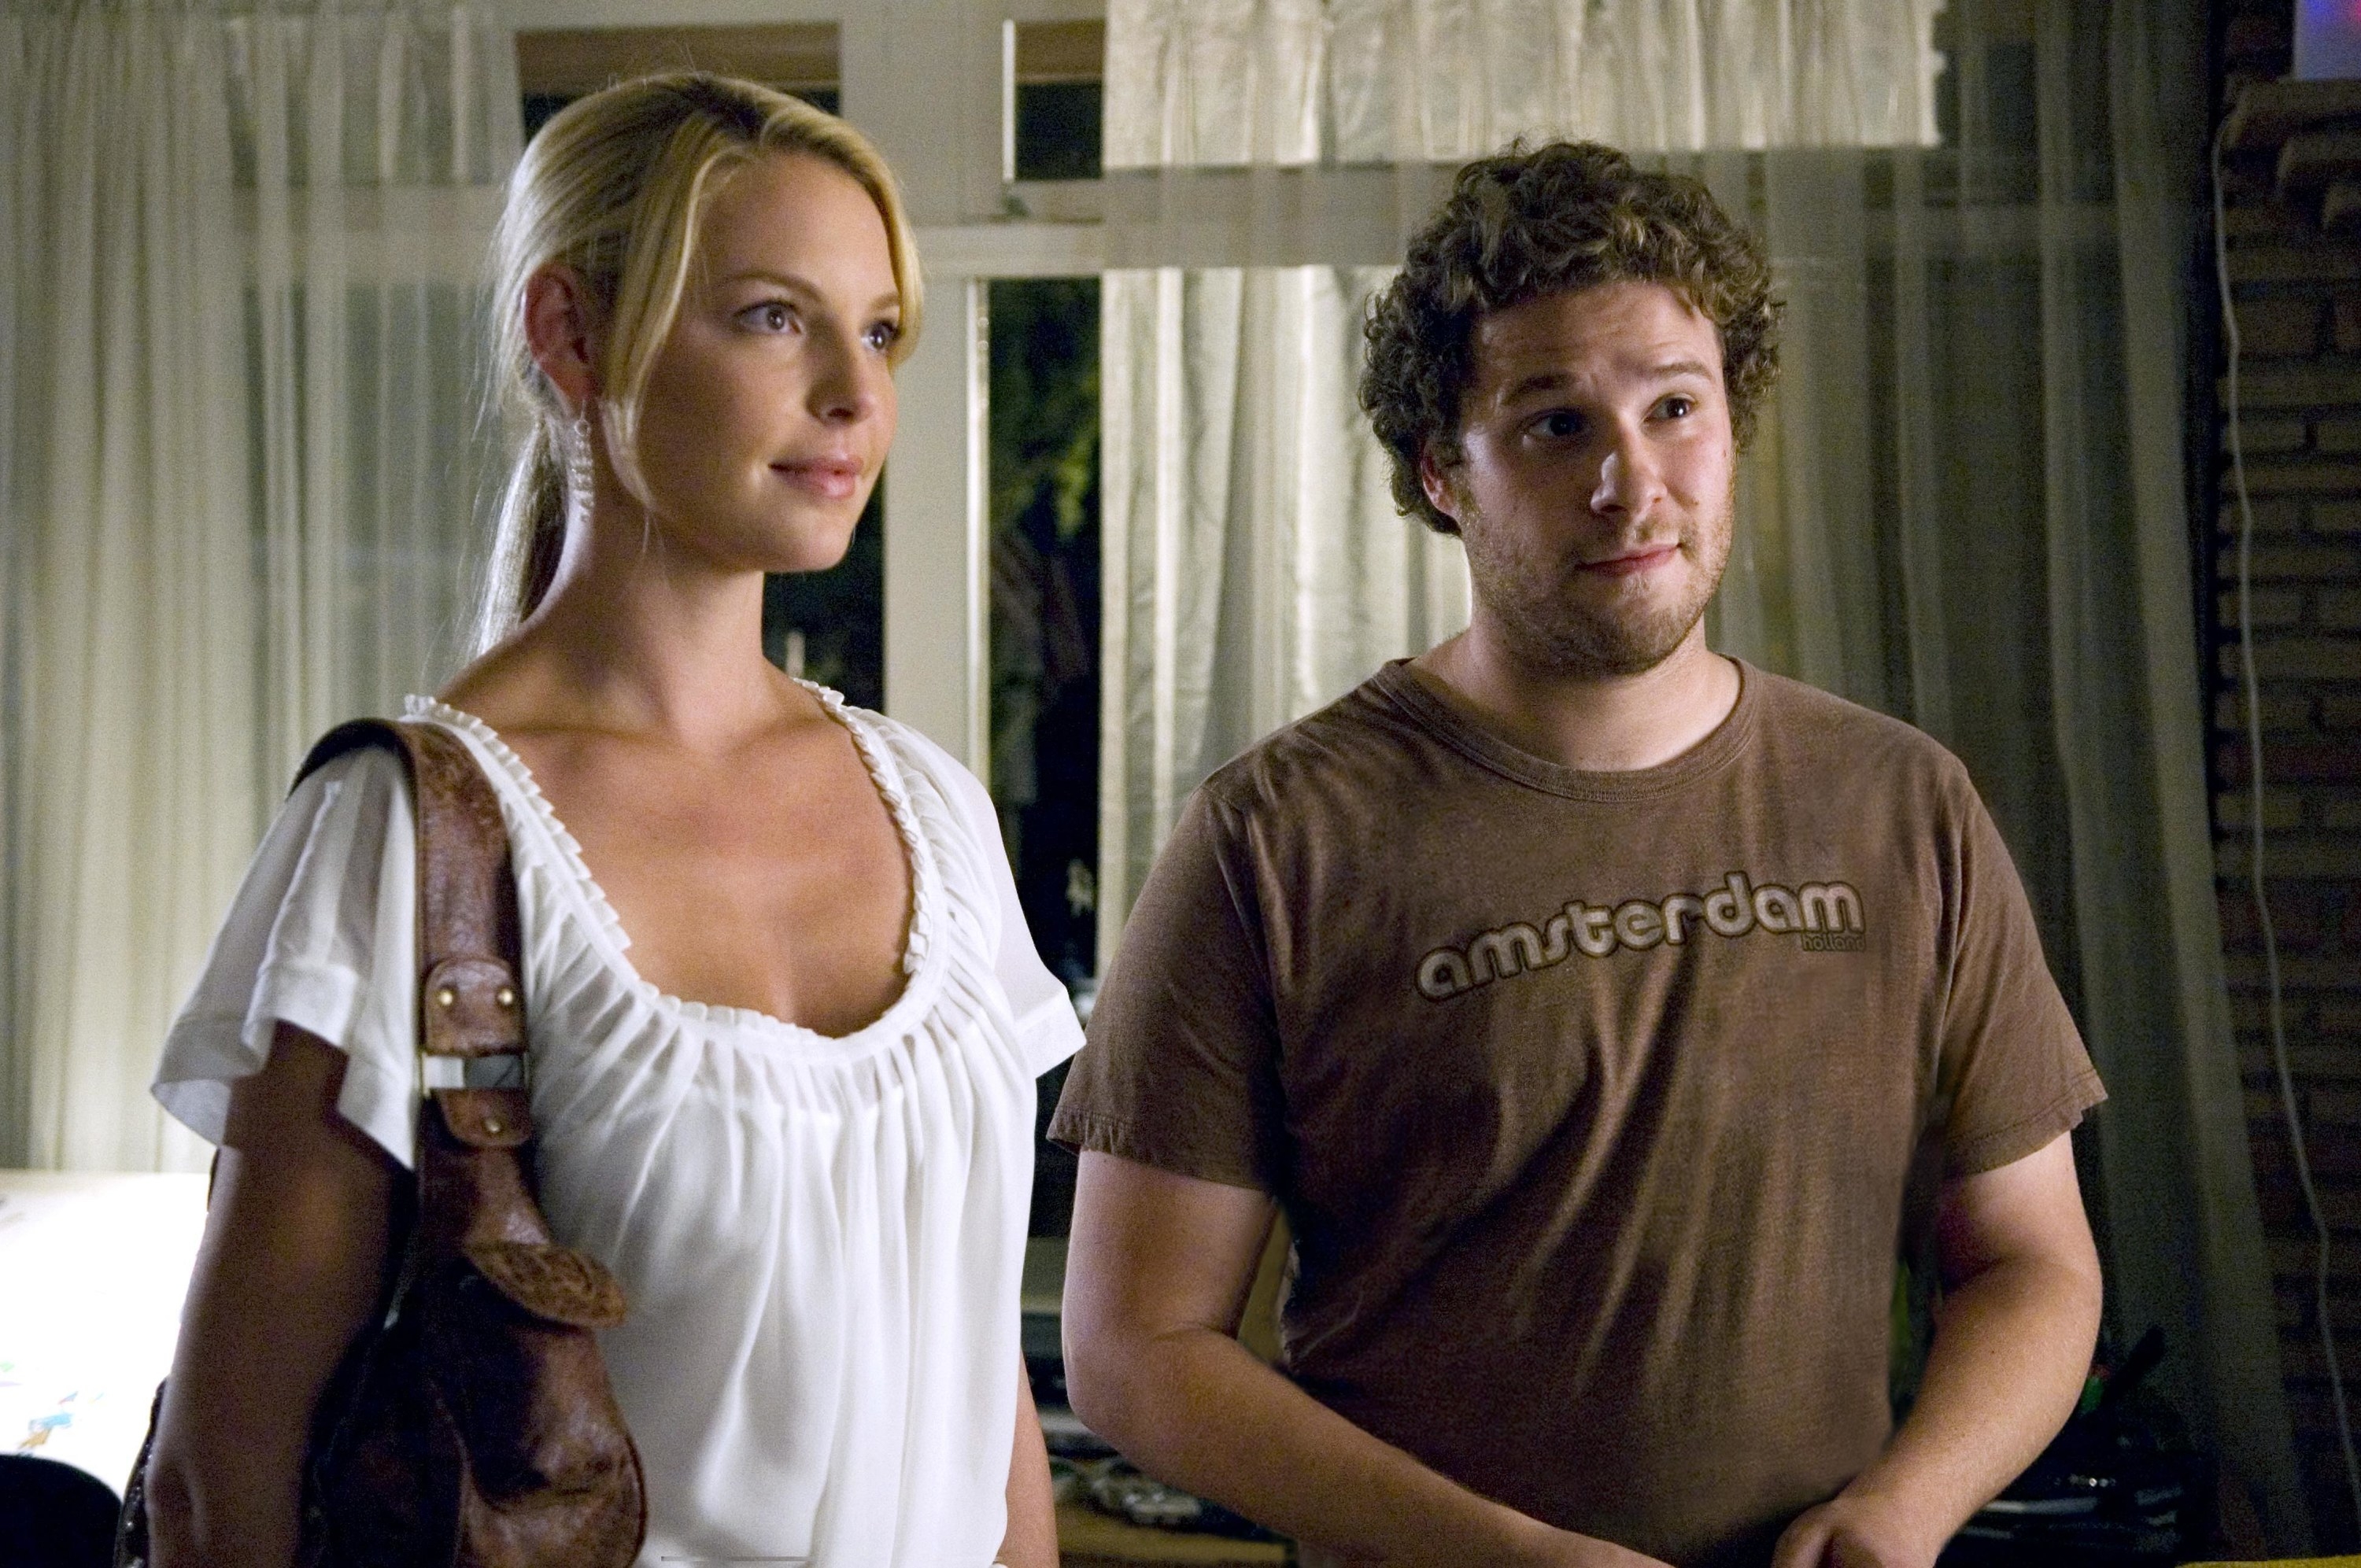 Katherine Heigl and Seth Rogen in “Knocked Up”